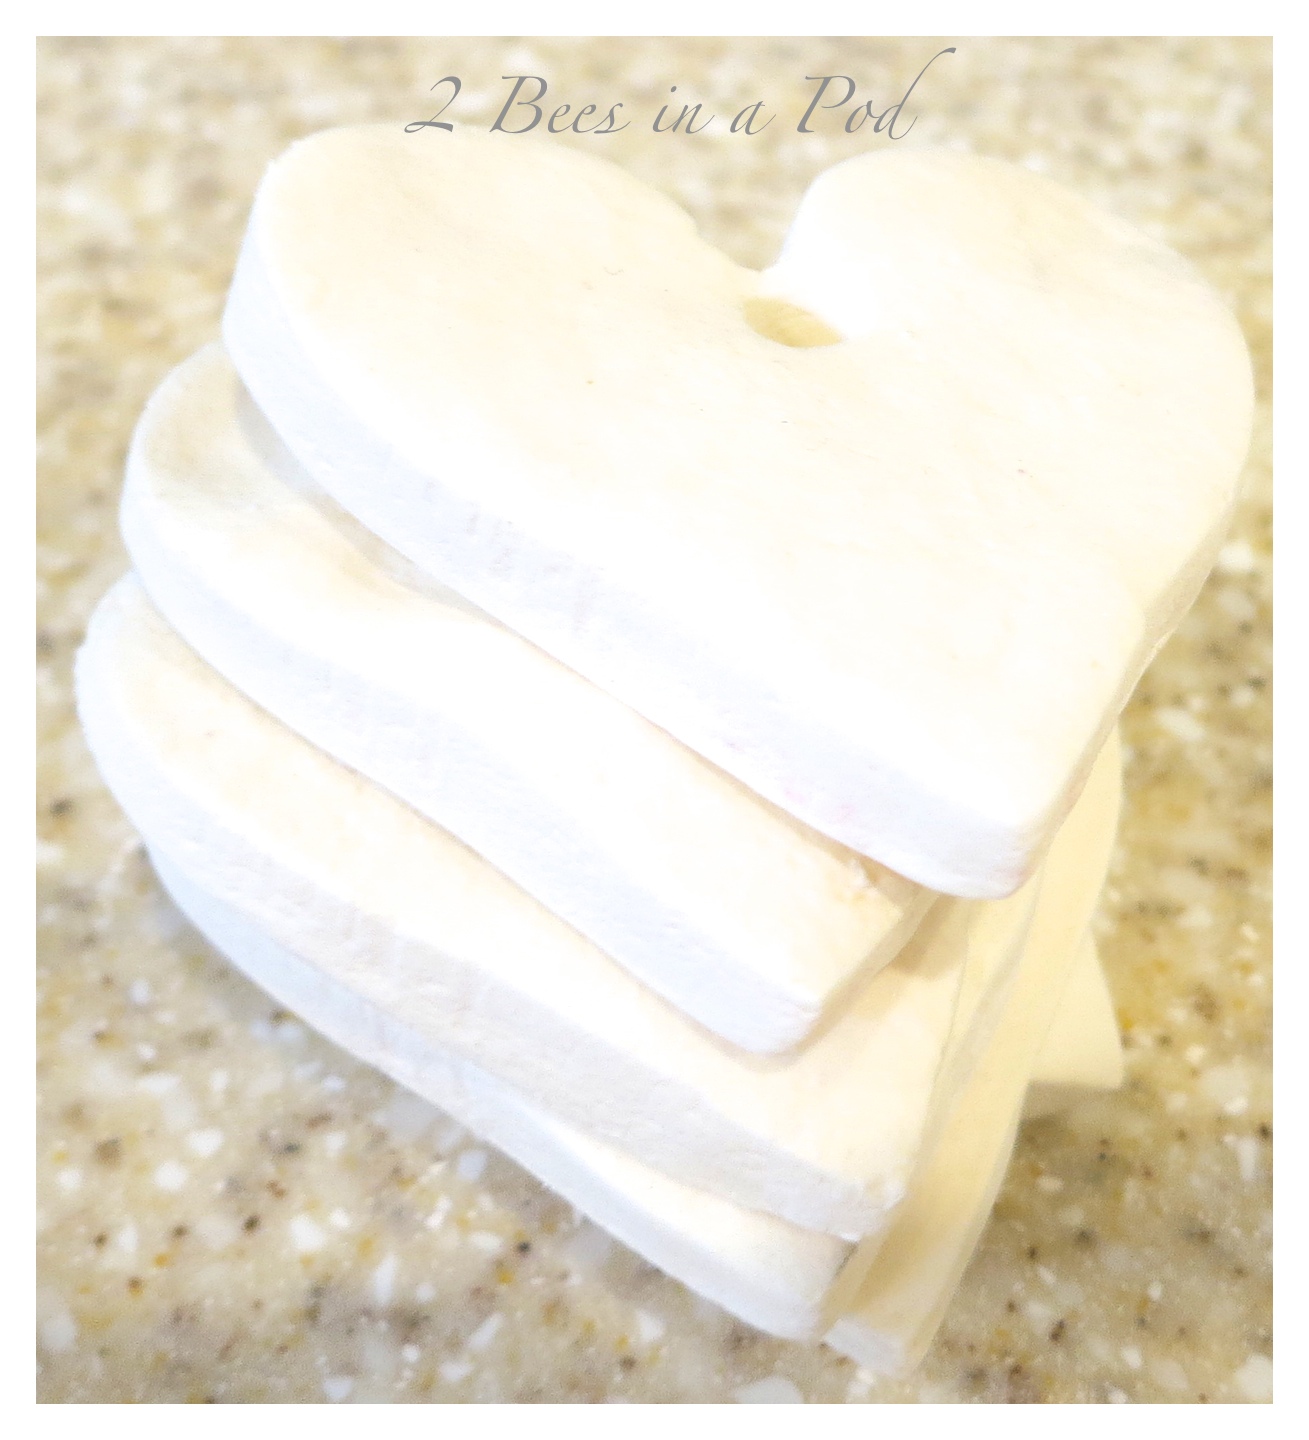 Homemade white clay gift tags for Valentines Day. Very easy to make clay using baking soda, corn starch and water. Use any cookie cutters or cutouts. Bake in the oven and the dough hardens. Very cute!!